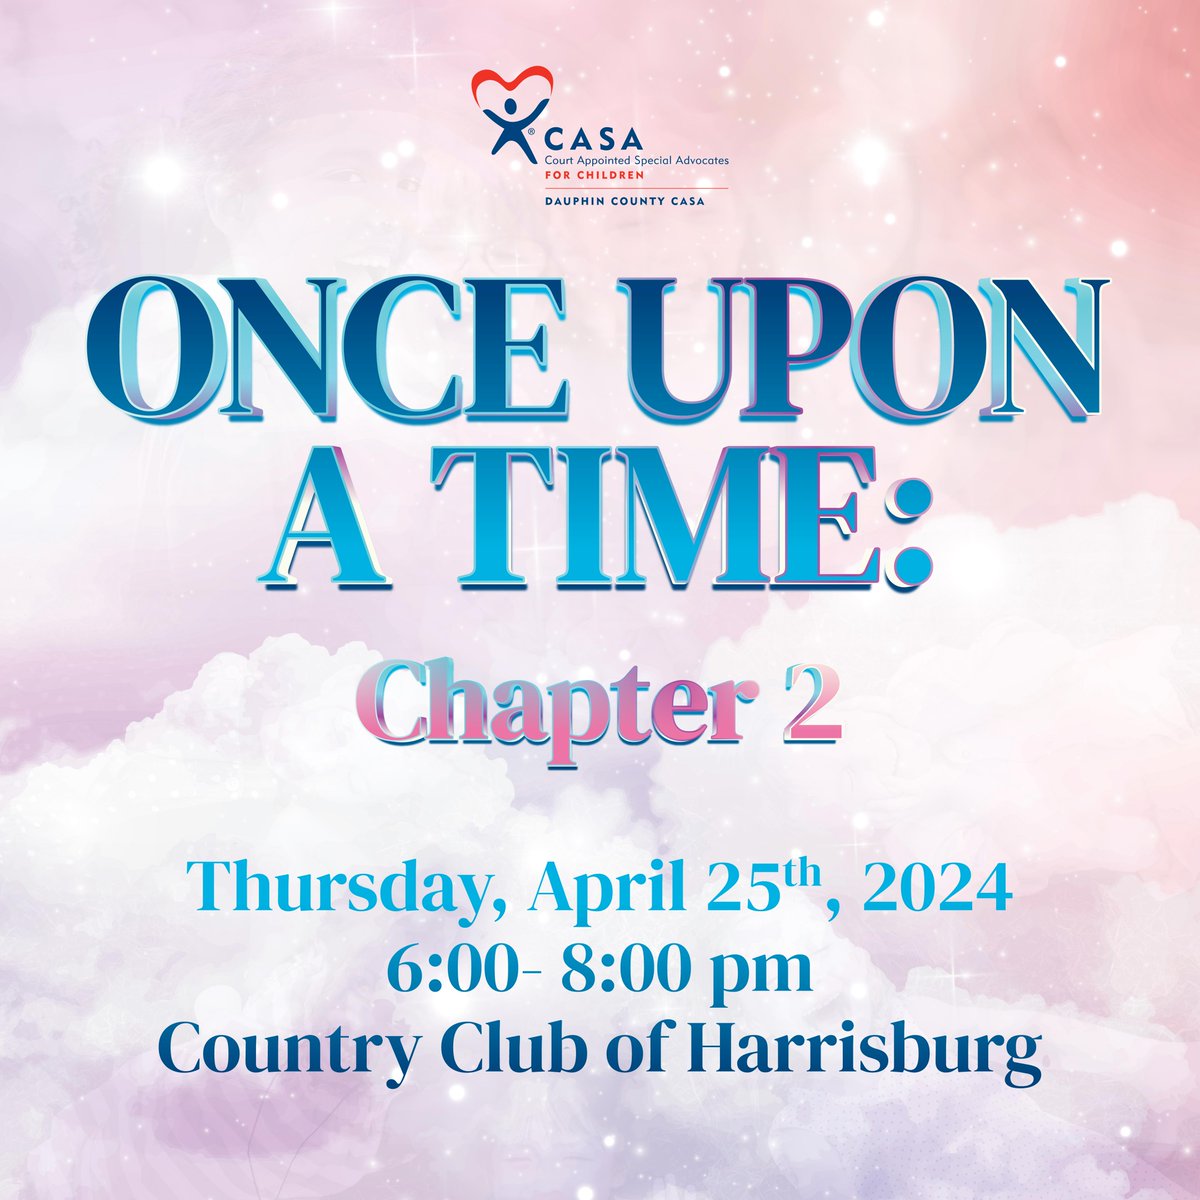 Today is the LAST DAY to buy your Once Upon A Time: Chapter 2 tickets! Ticket sales end at 11:59pm TONIGHT! 😱 🎟️ Buy yours here: dauphincountycasa.org/event/once-upo…